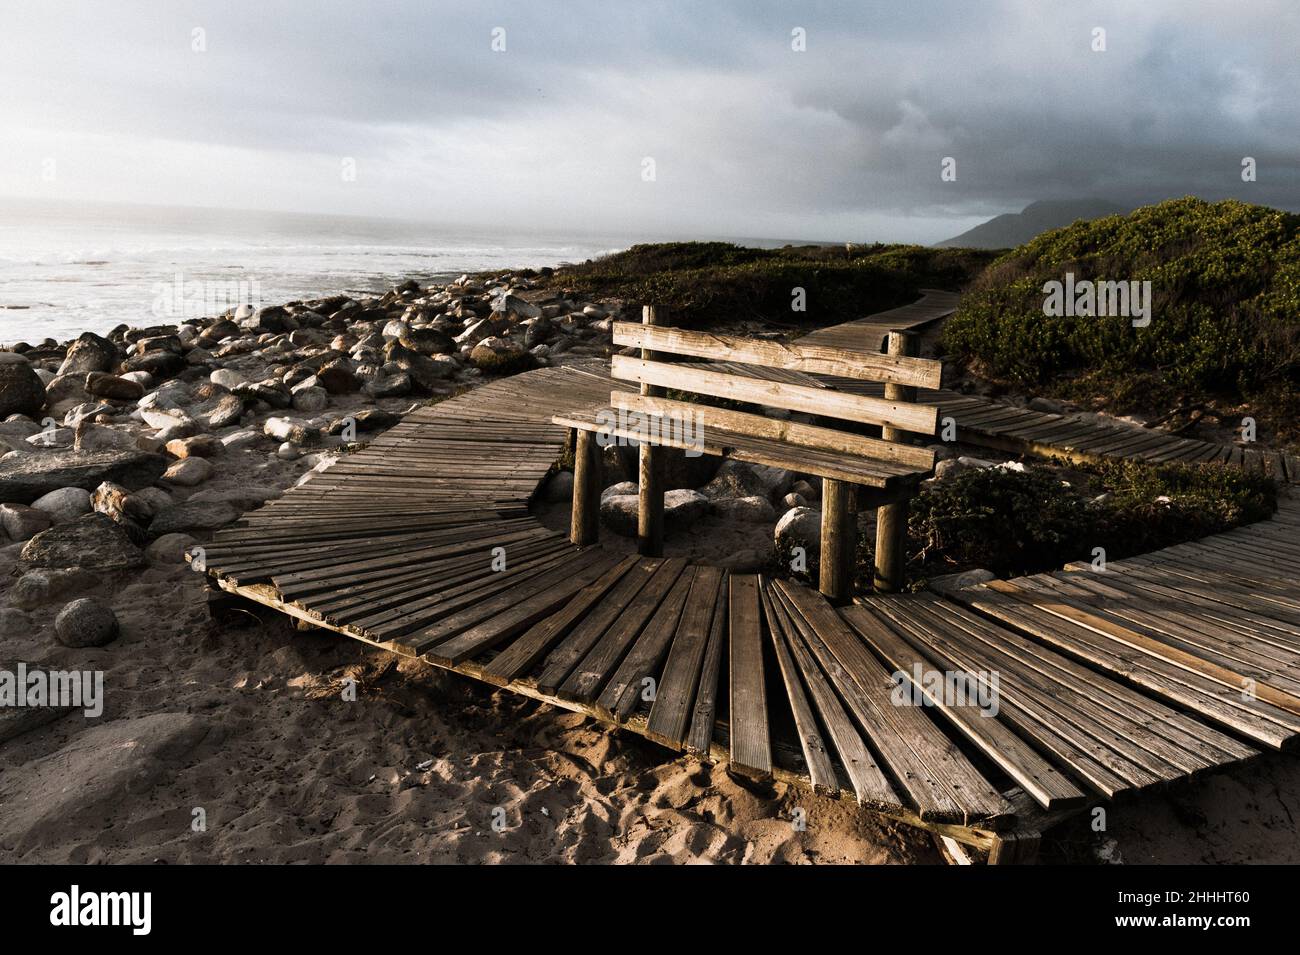 A roughly hewn boardwalk in the small Cape Peninsula town of Kommetjie on the South African Atlantic seaboard near Cape Town Stock Photo